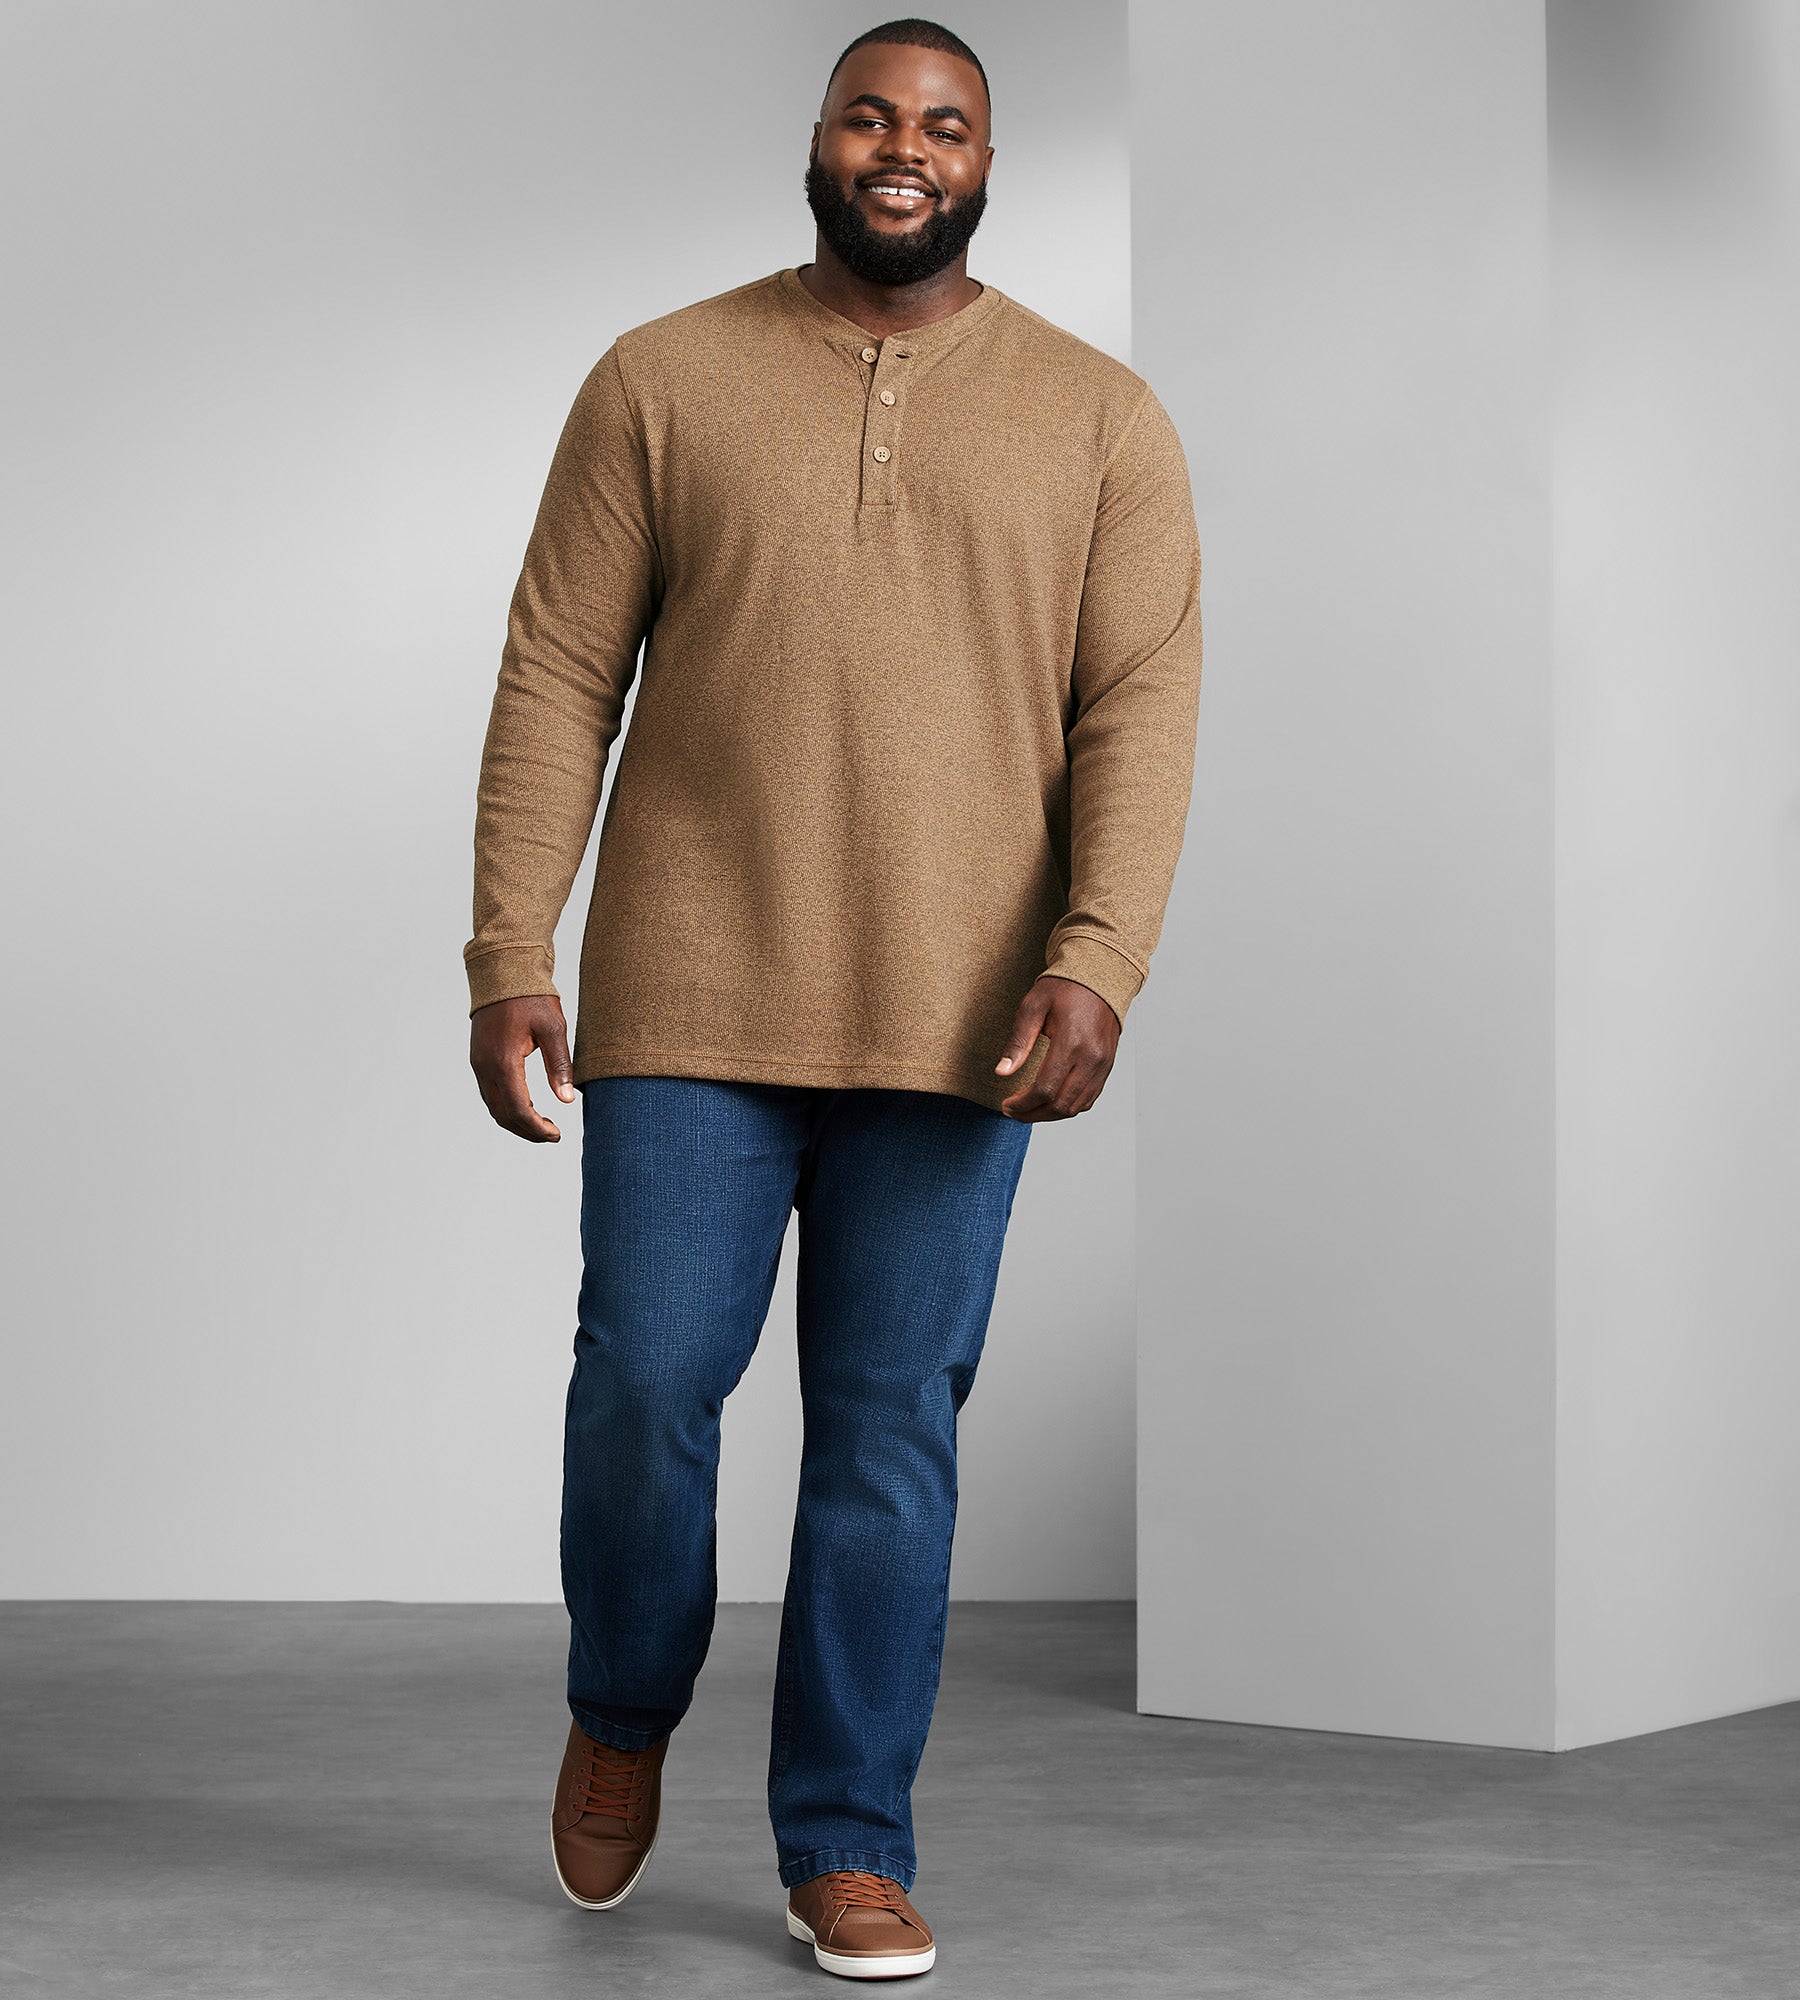 Men's Waffle-Knit Henley Athletic Top - All In Motion™ Stone XL